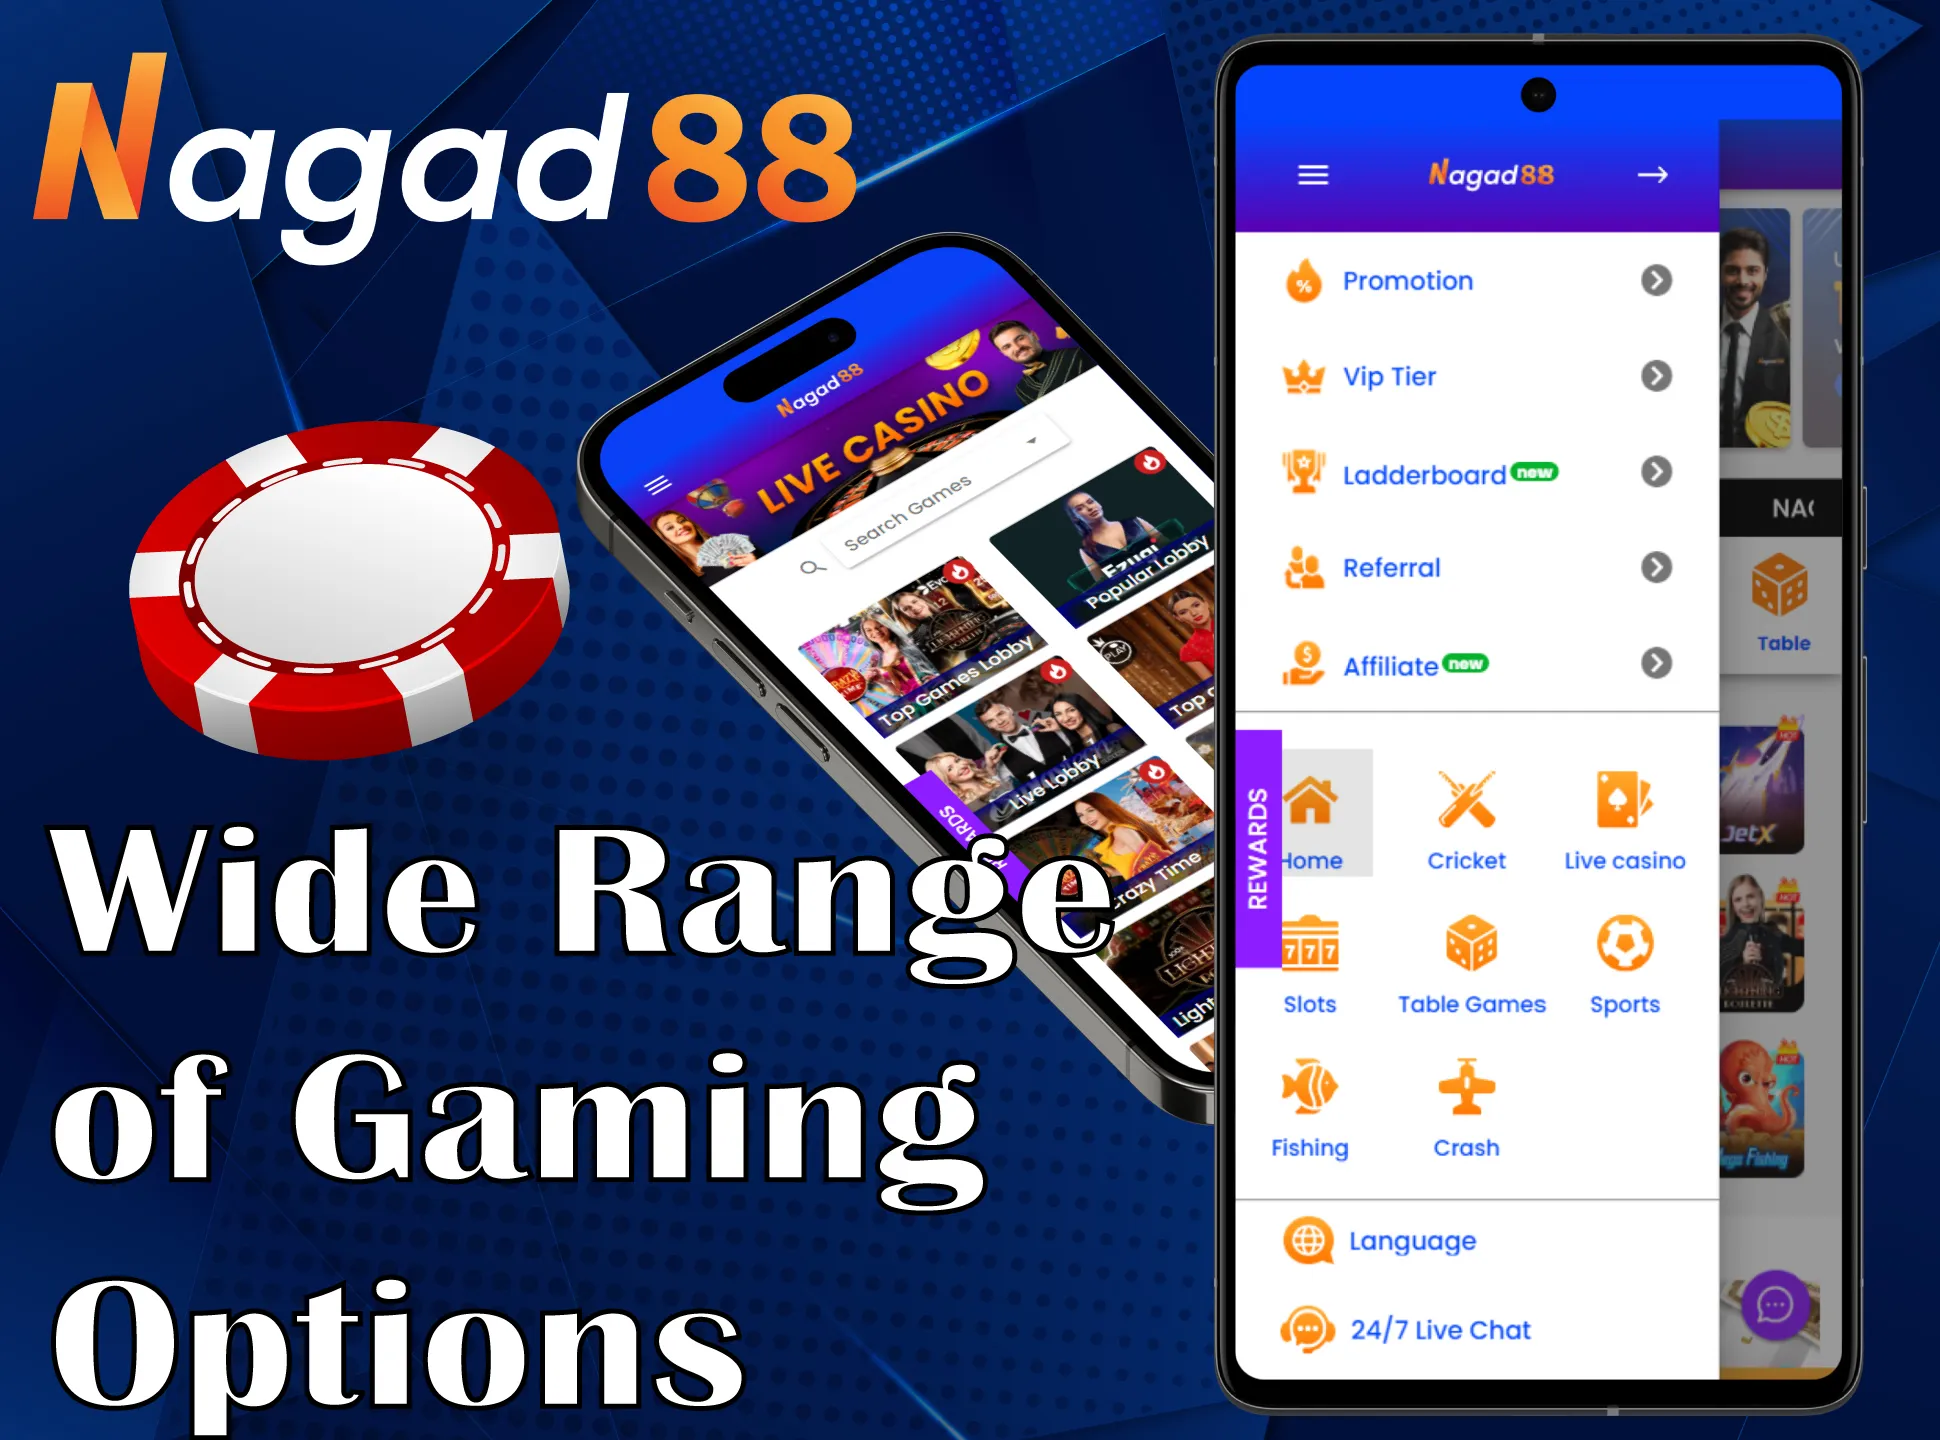 The Nagad88 app offers a wide range of gaming options.